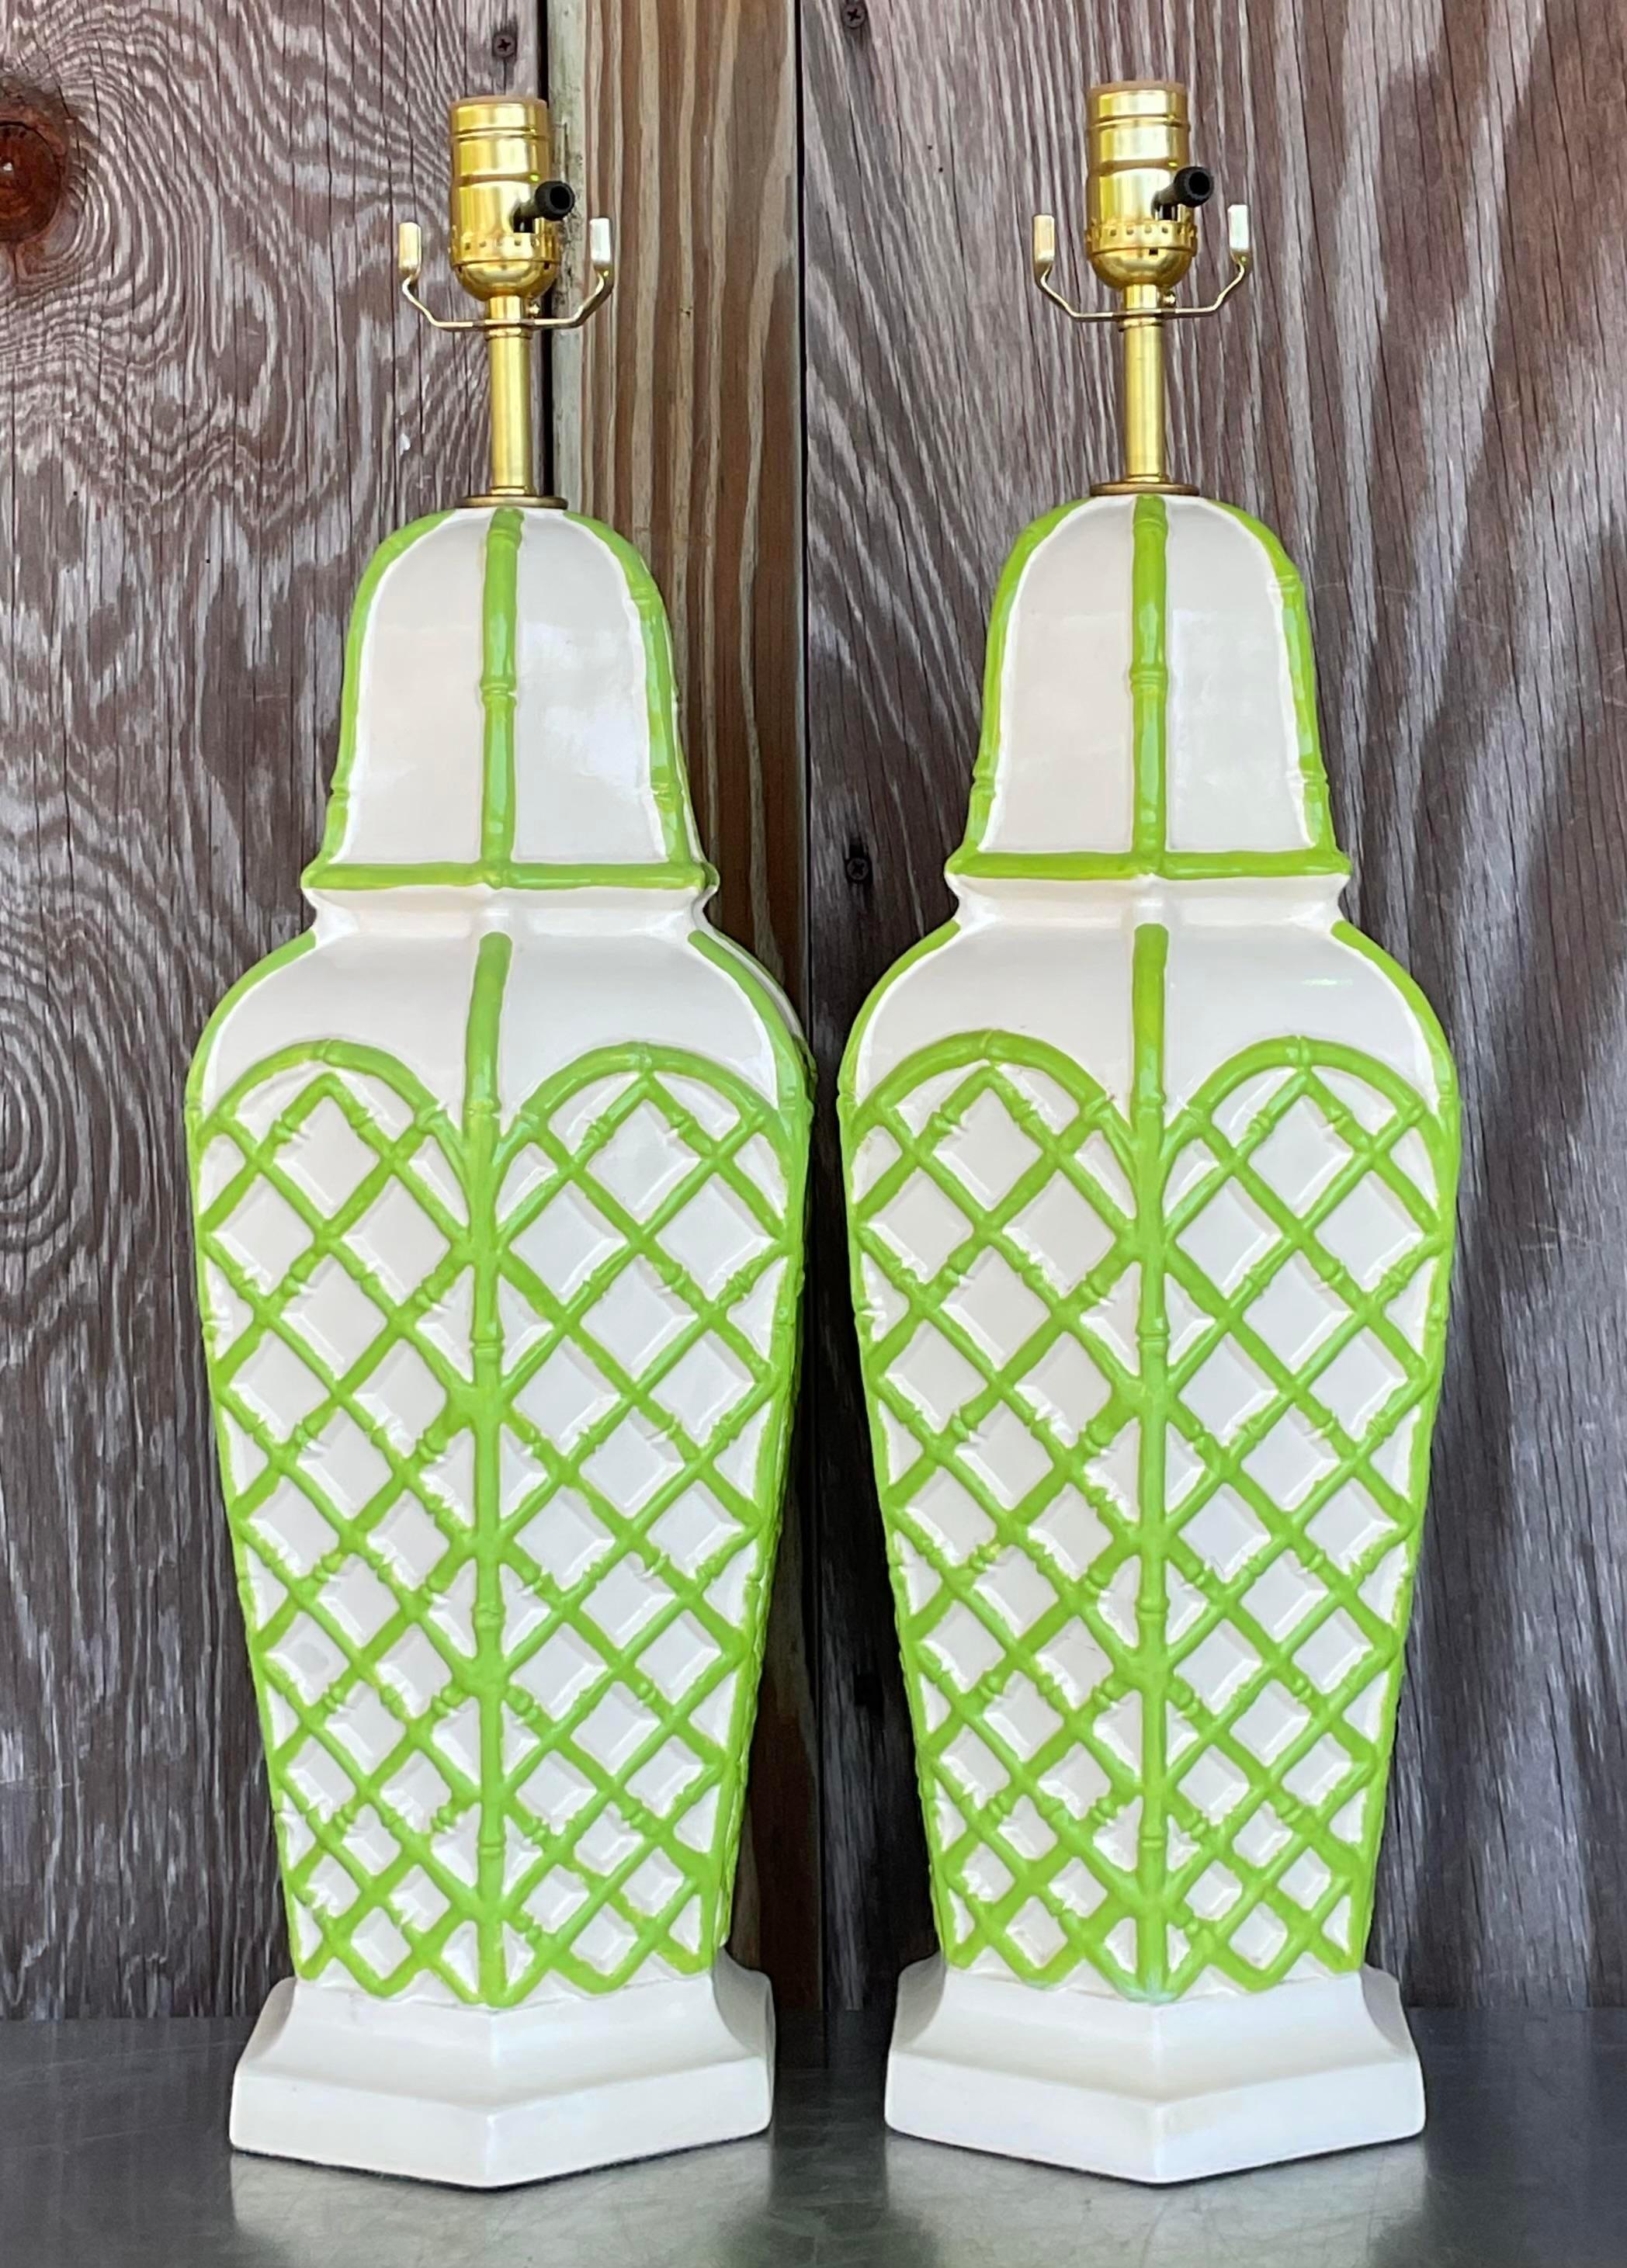 Vintage Coastal Bamboo Trellis Glazed Ceramic Lamps - a Pair In Good Condition For Sale In west palm beach, FL